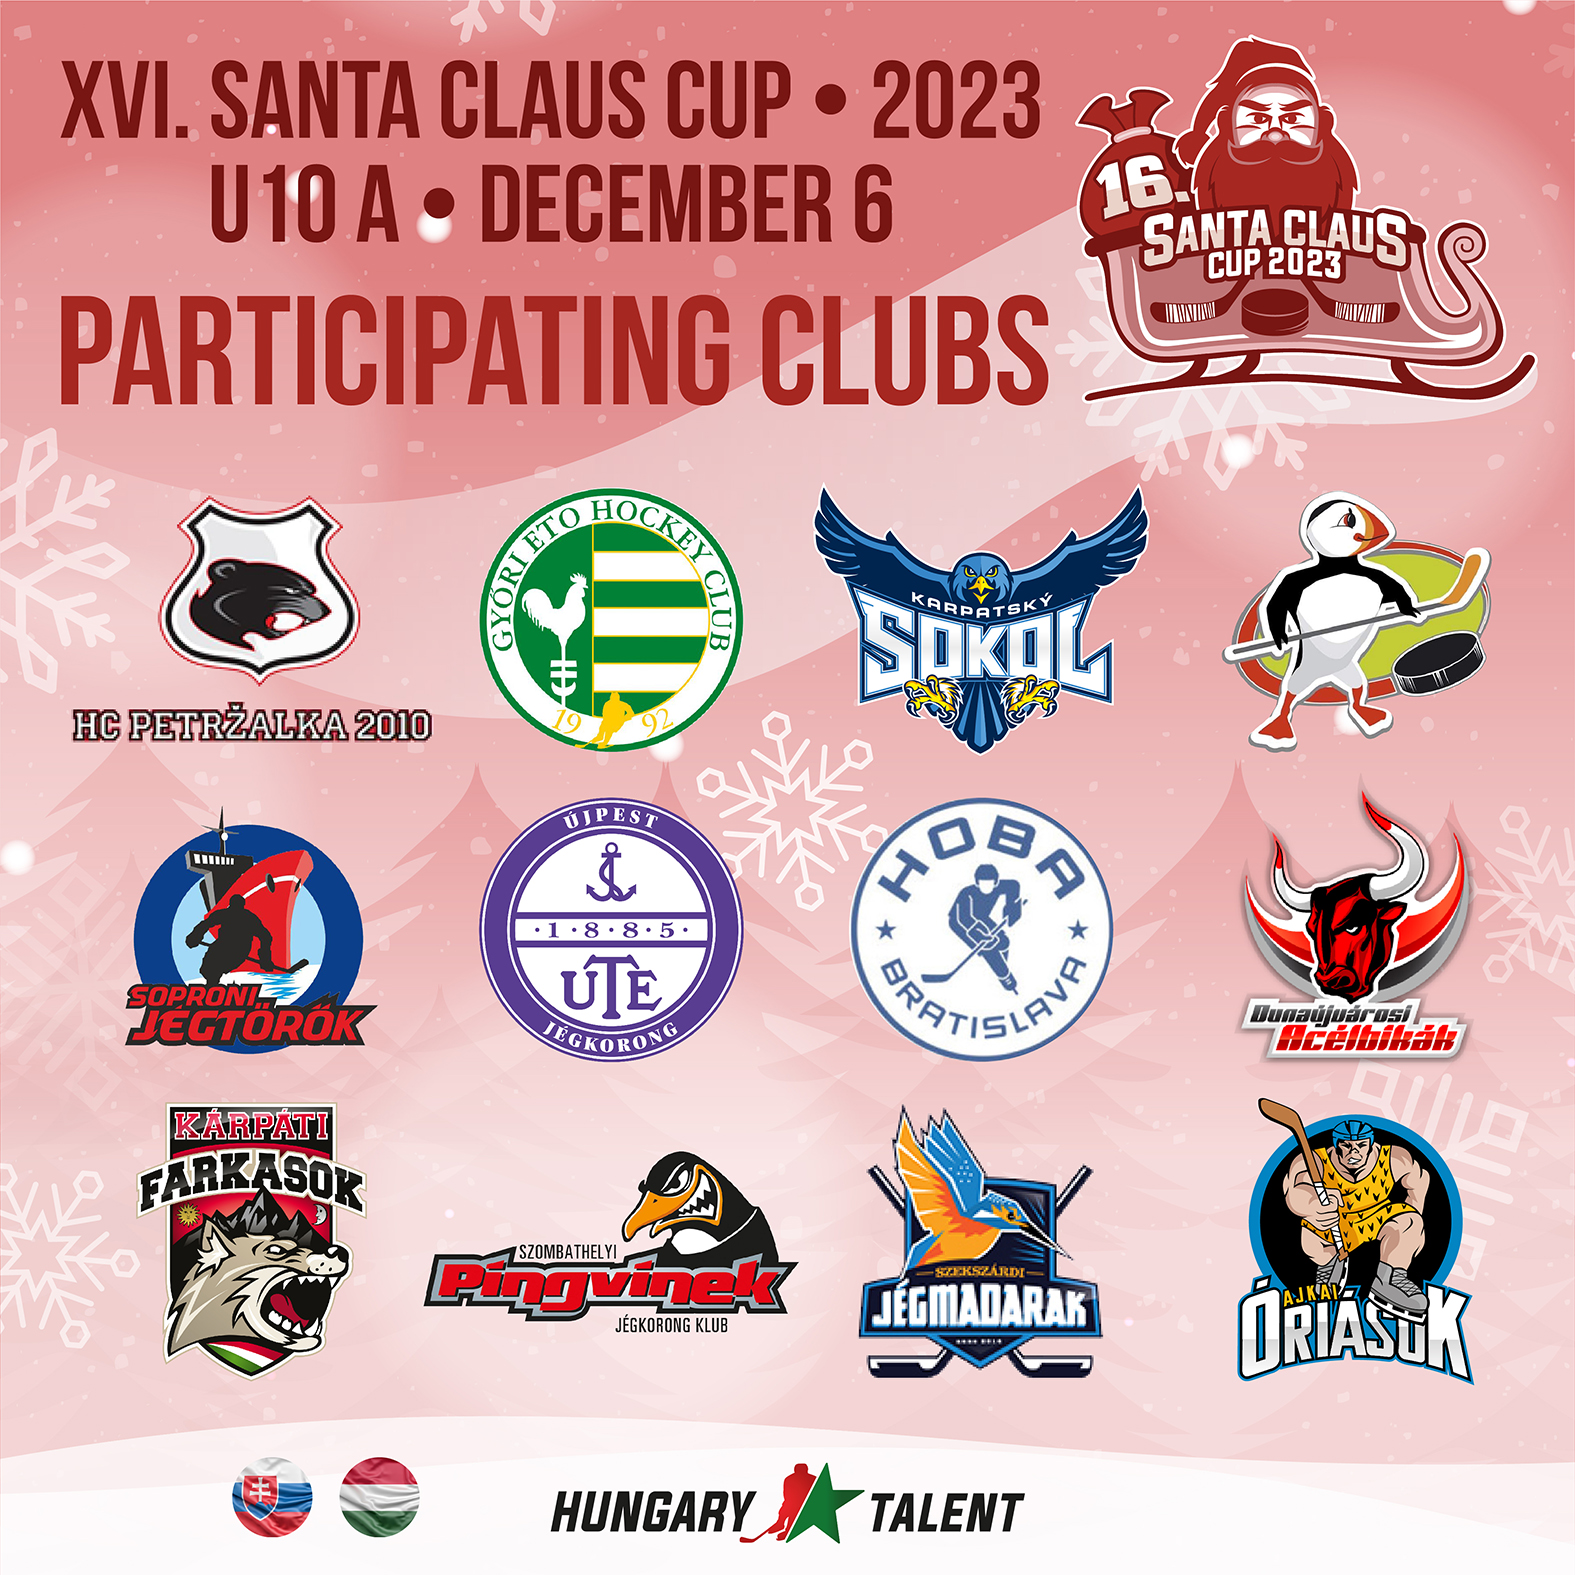 Introducing the 16th Santa Claus Cup A tournament